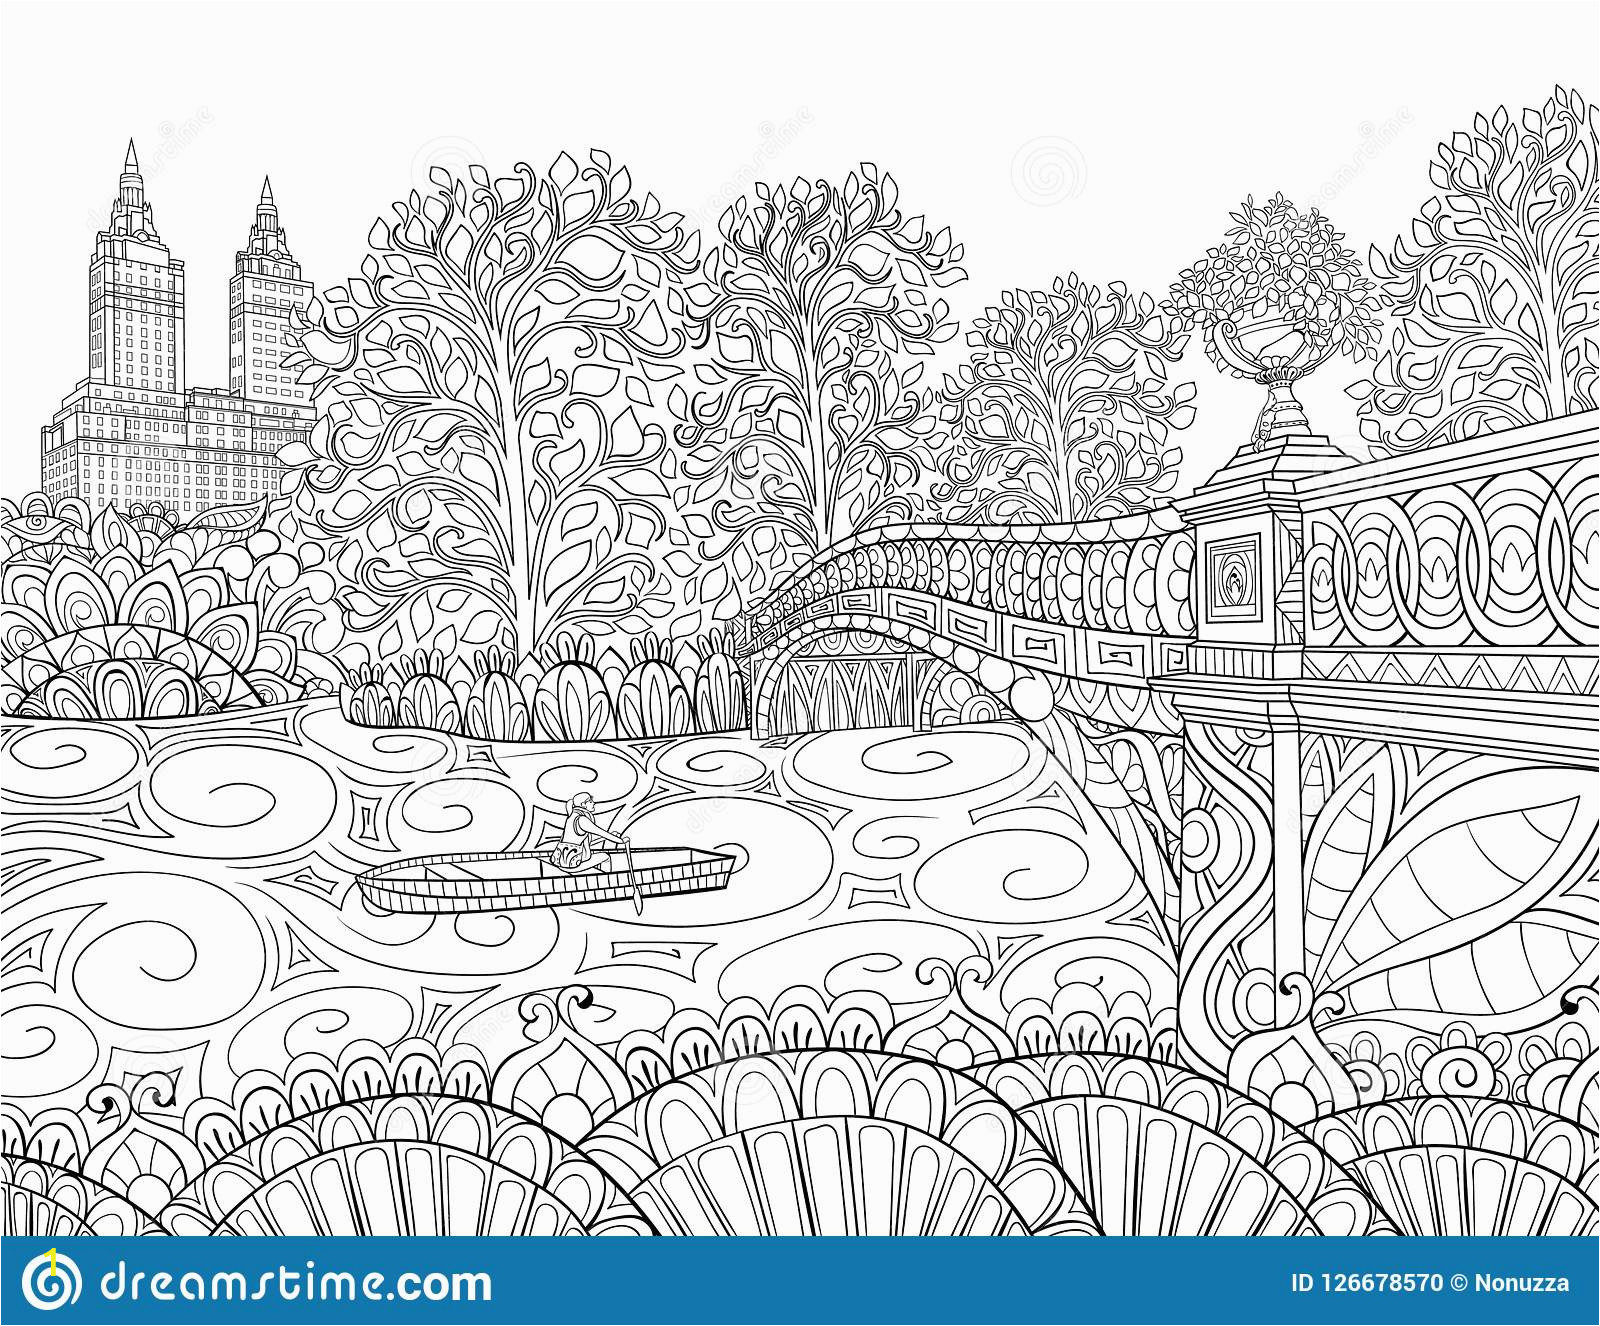 Landscape Coloring Pages for Adults Coloring Book Adult Coloring Bookpagendscape Image for